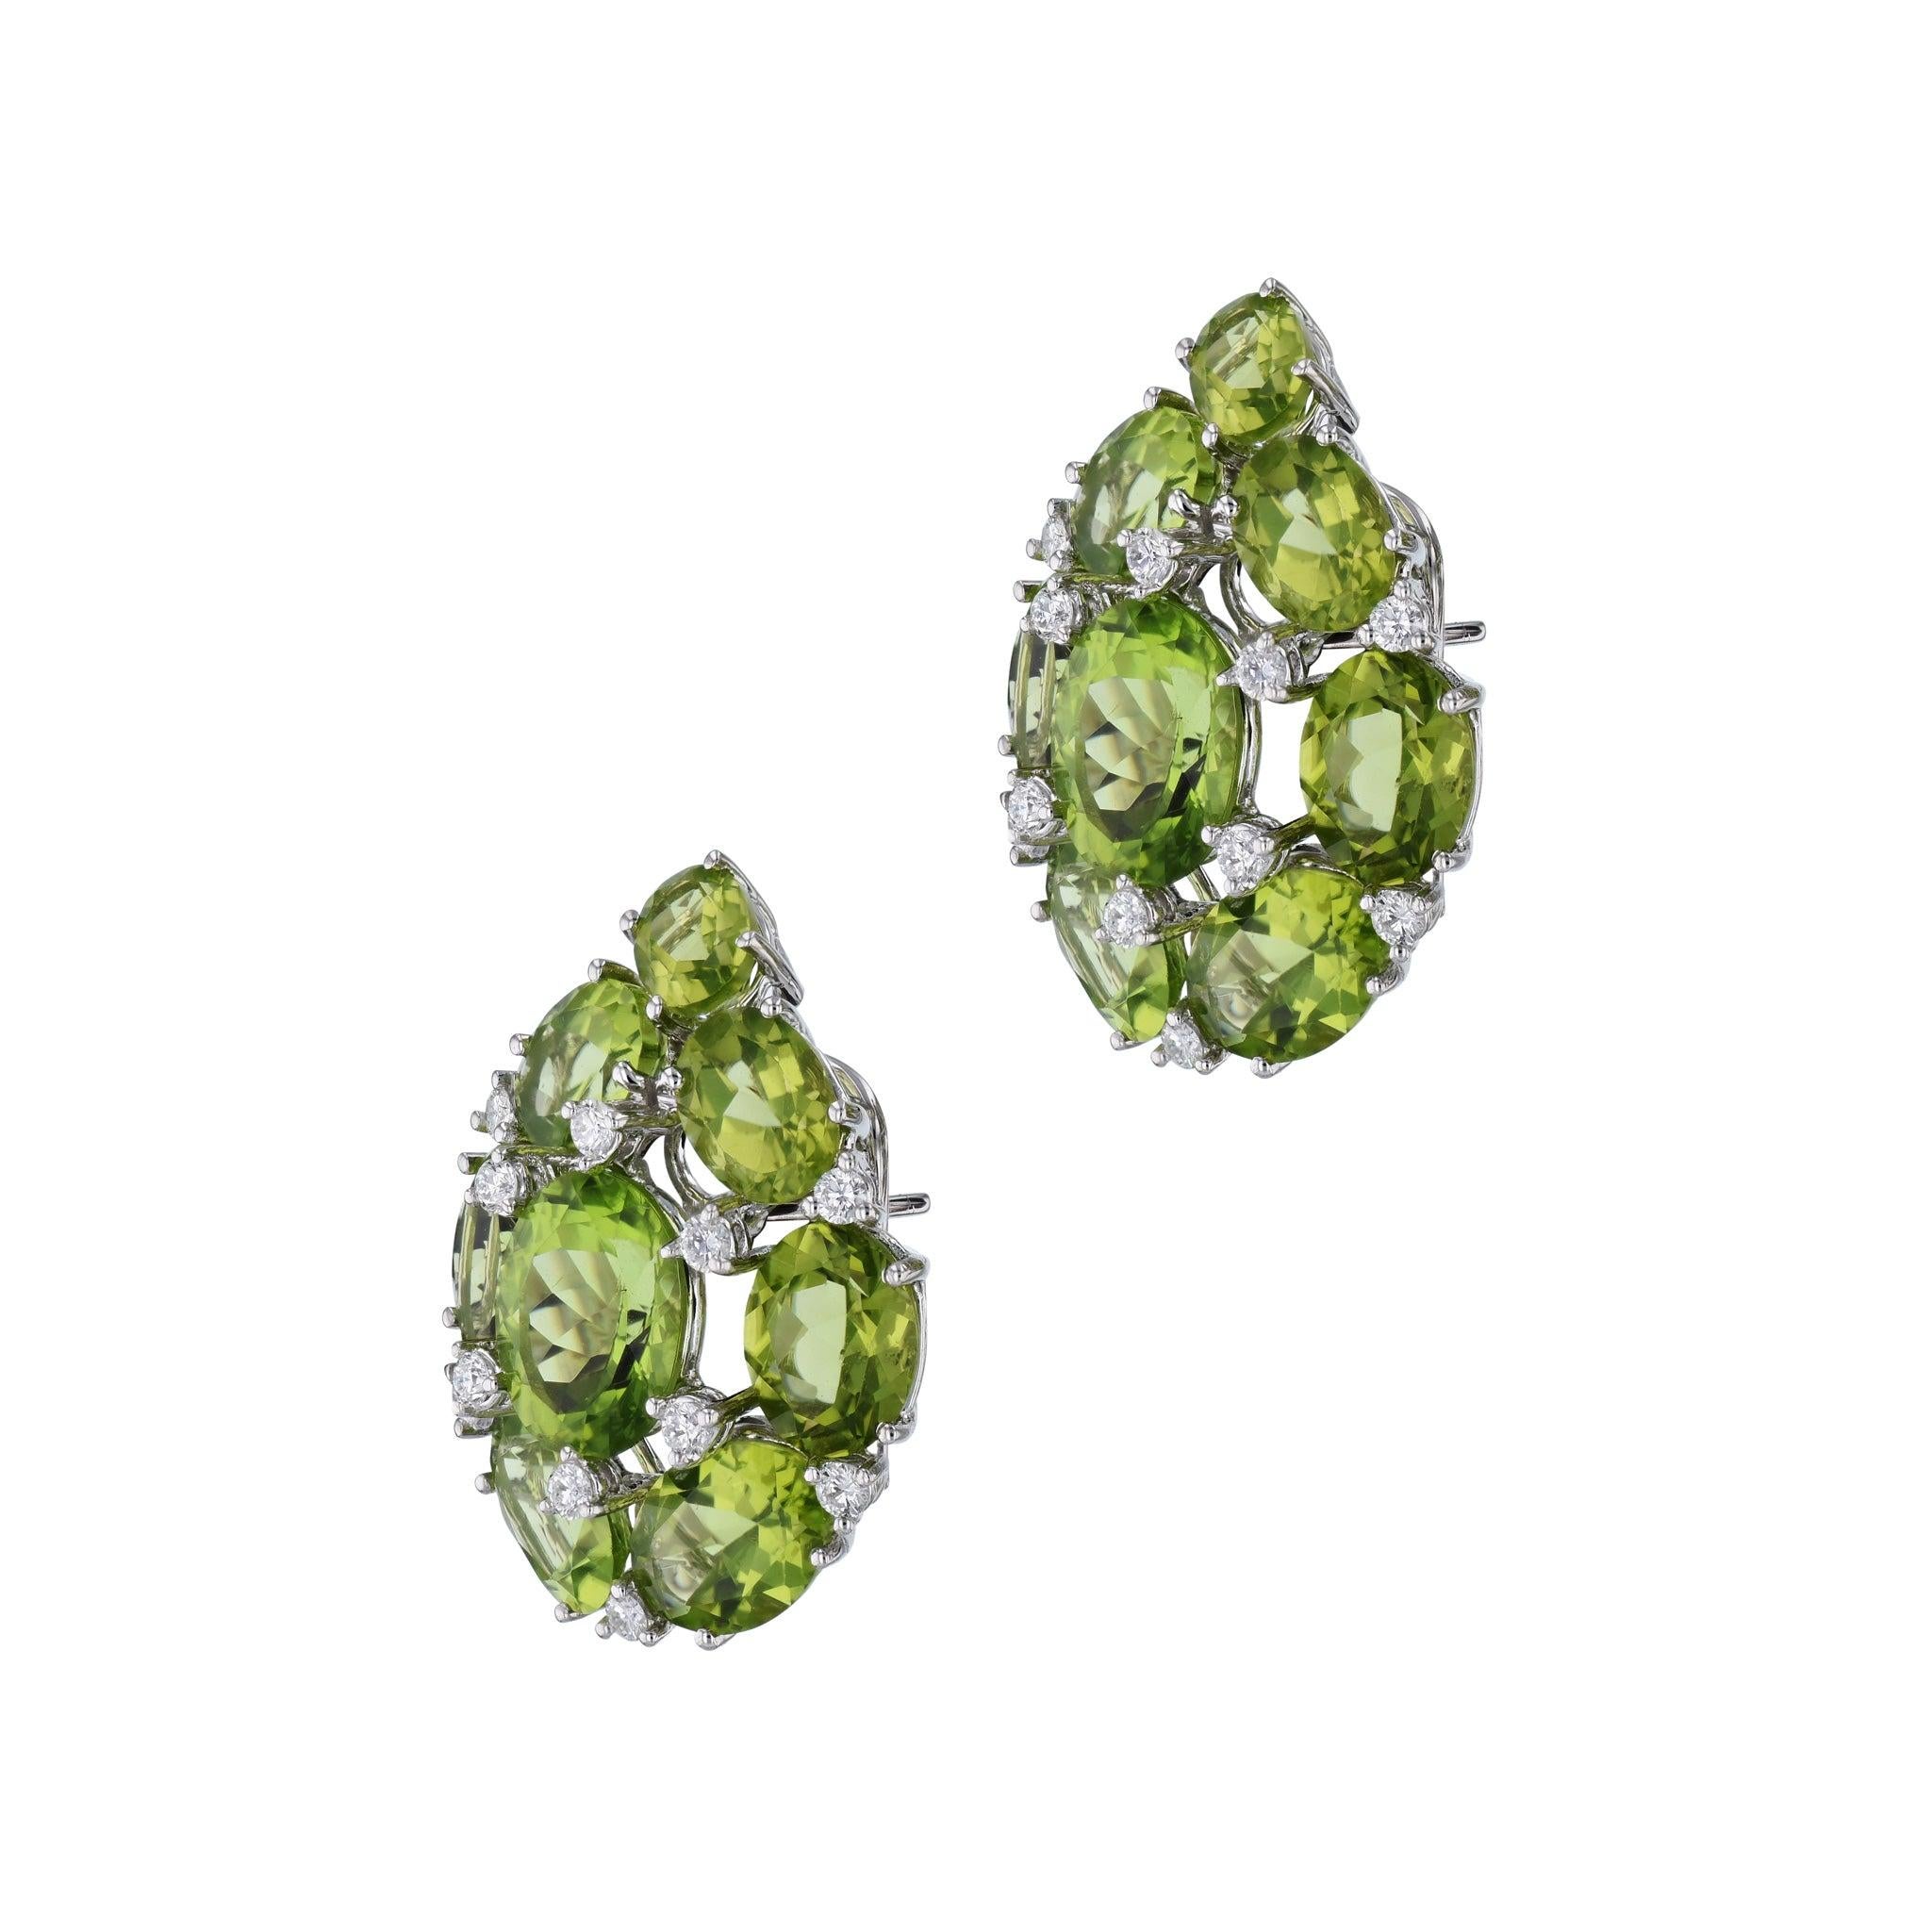 These magnificent Peridot and Diamond cluster earrings will adorn your ears in unrivaled beauty! Each earring is crafted with 8 peridot stones and diamonds set in white gold. Express your unique style and glamor with these stunning earrings!
Peridot